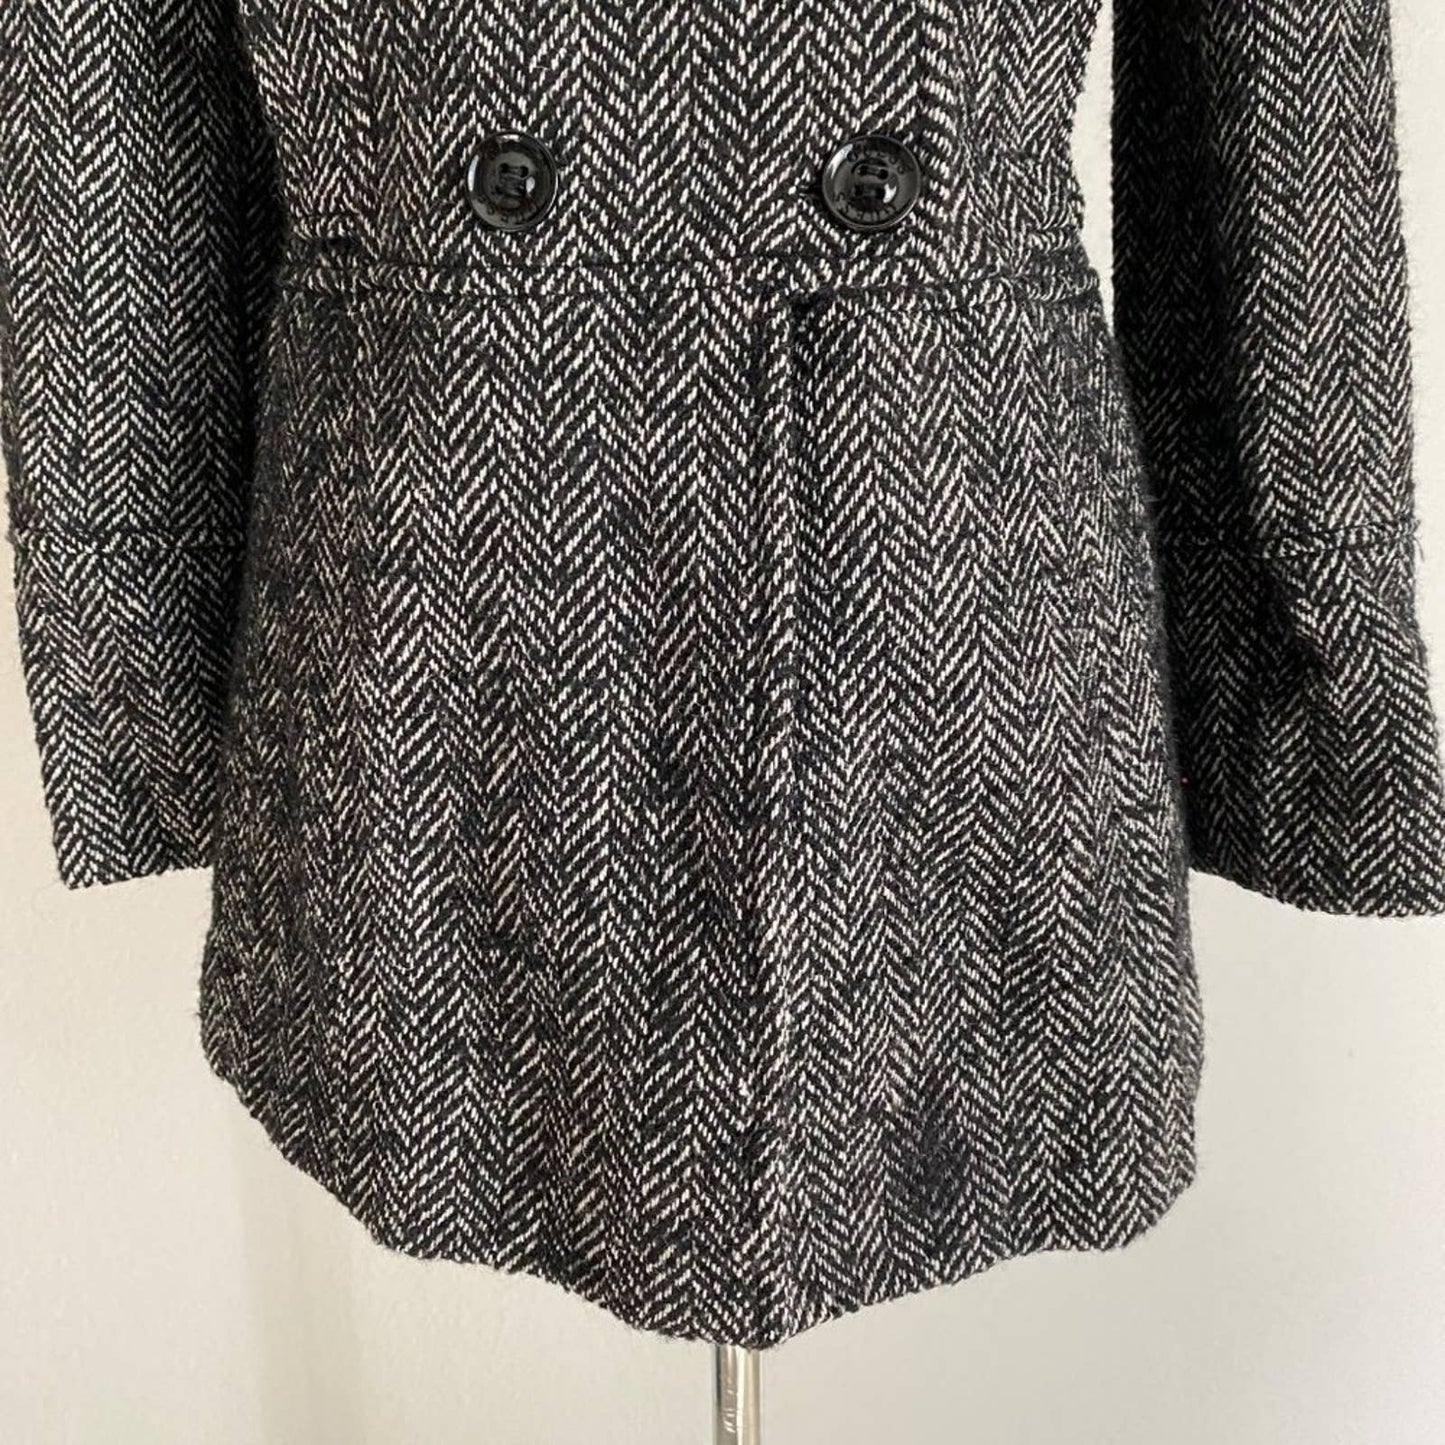 Guess sz XS wool long sleeve tweed double breast trench winter coat